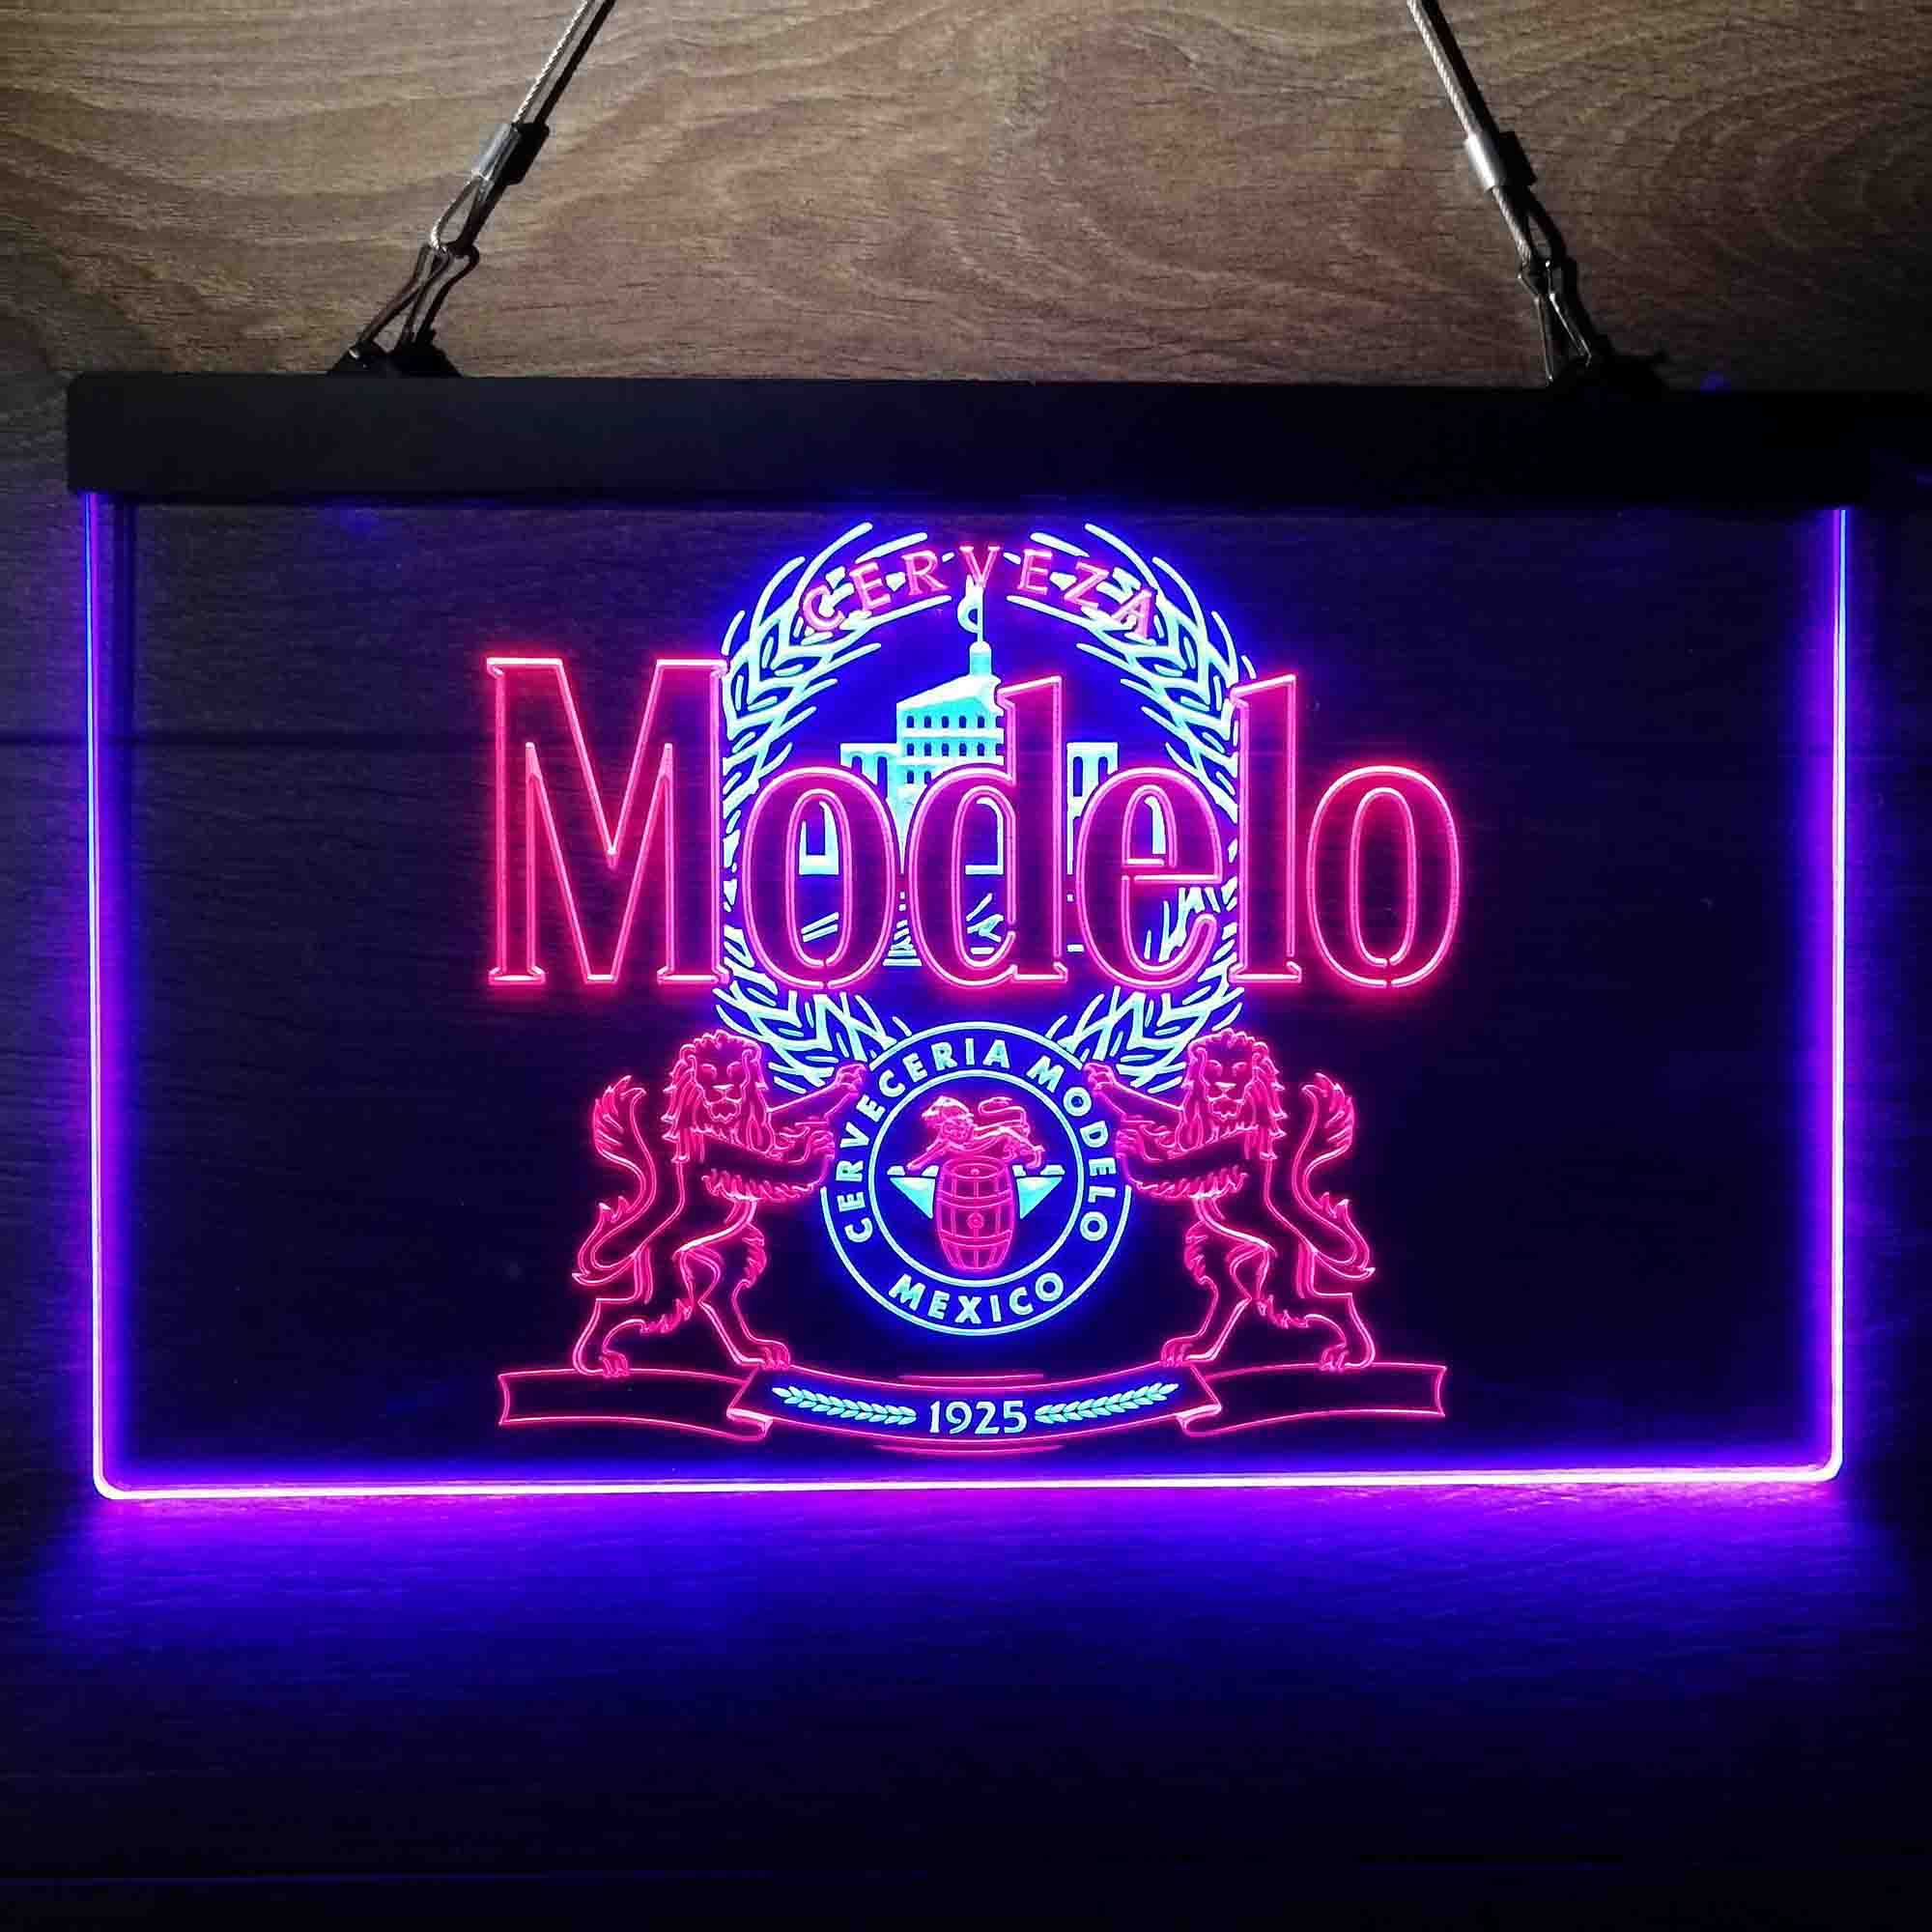 Modelo Especial Beer Neon-Like LED Sign